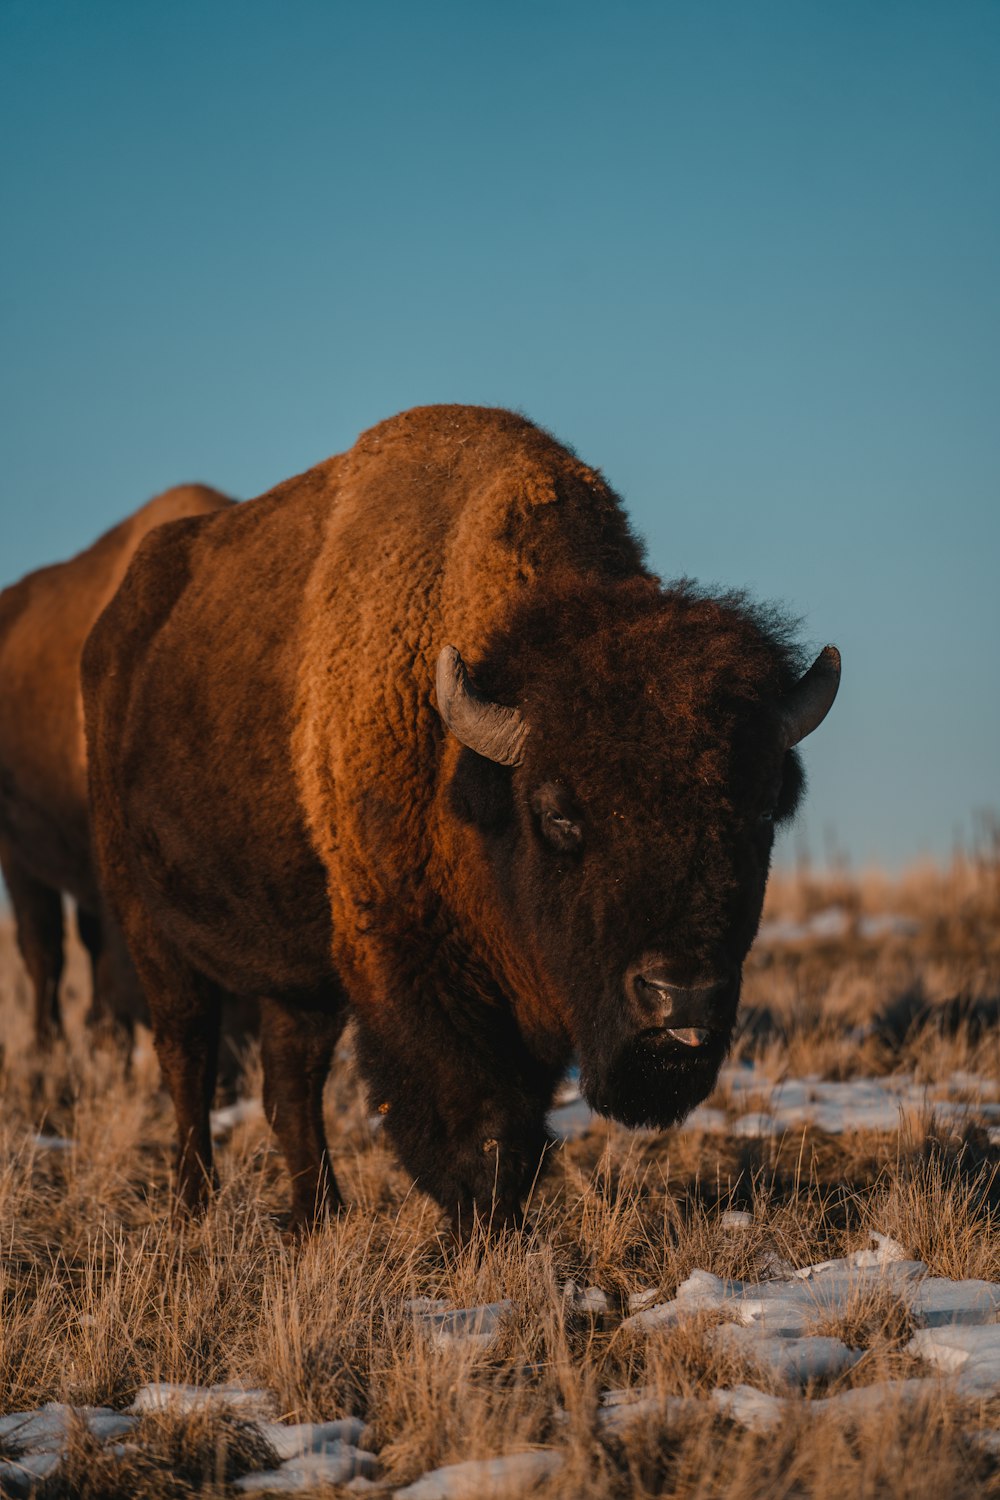 a bison is standing in a snowy field